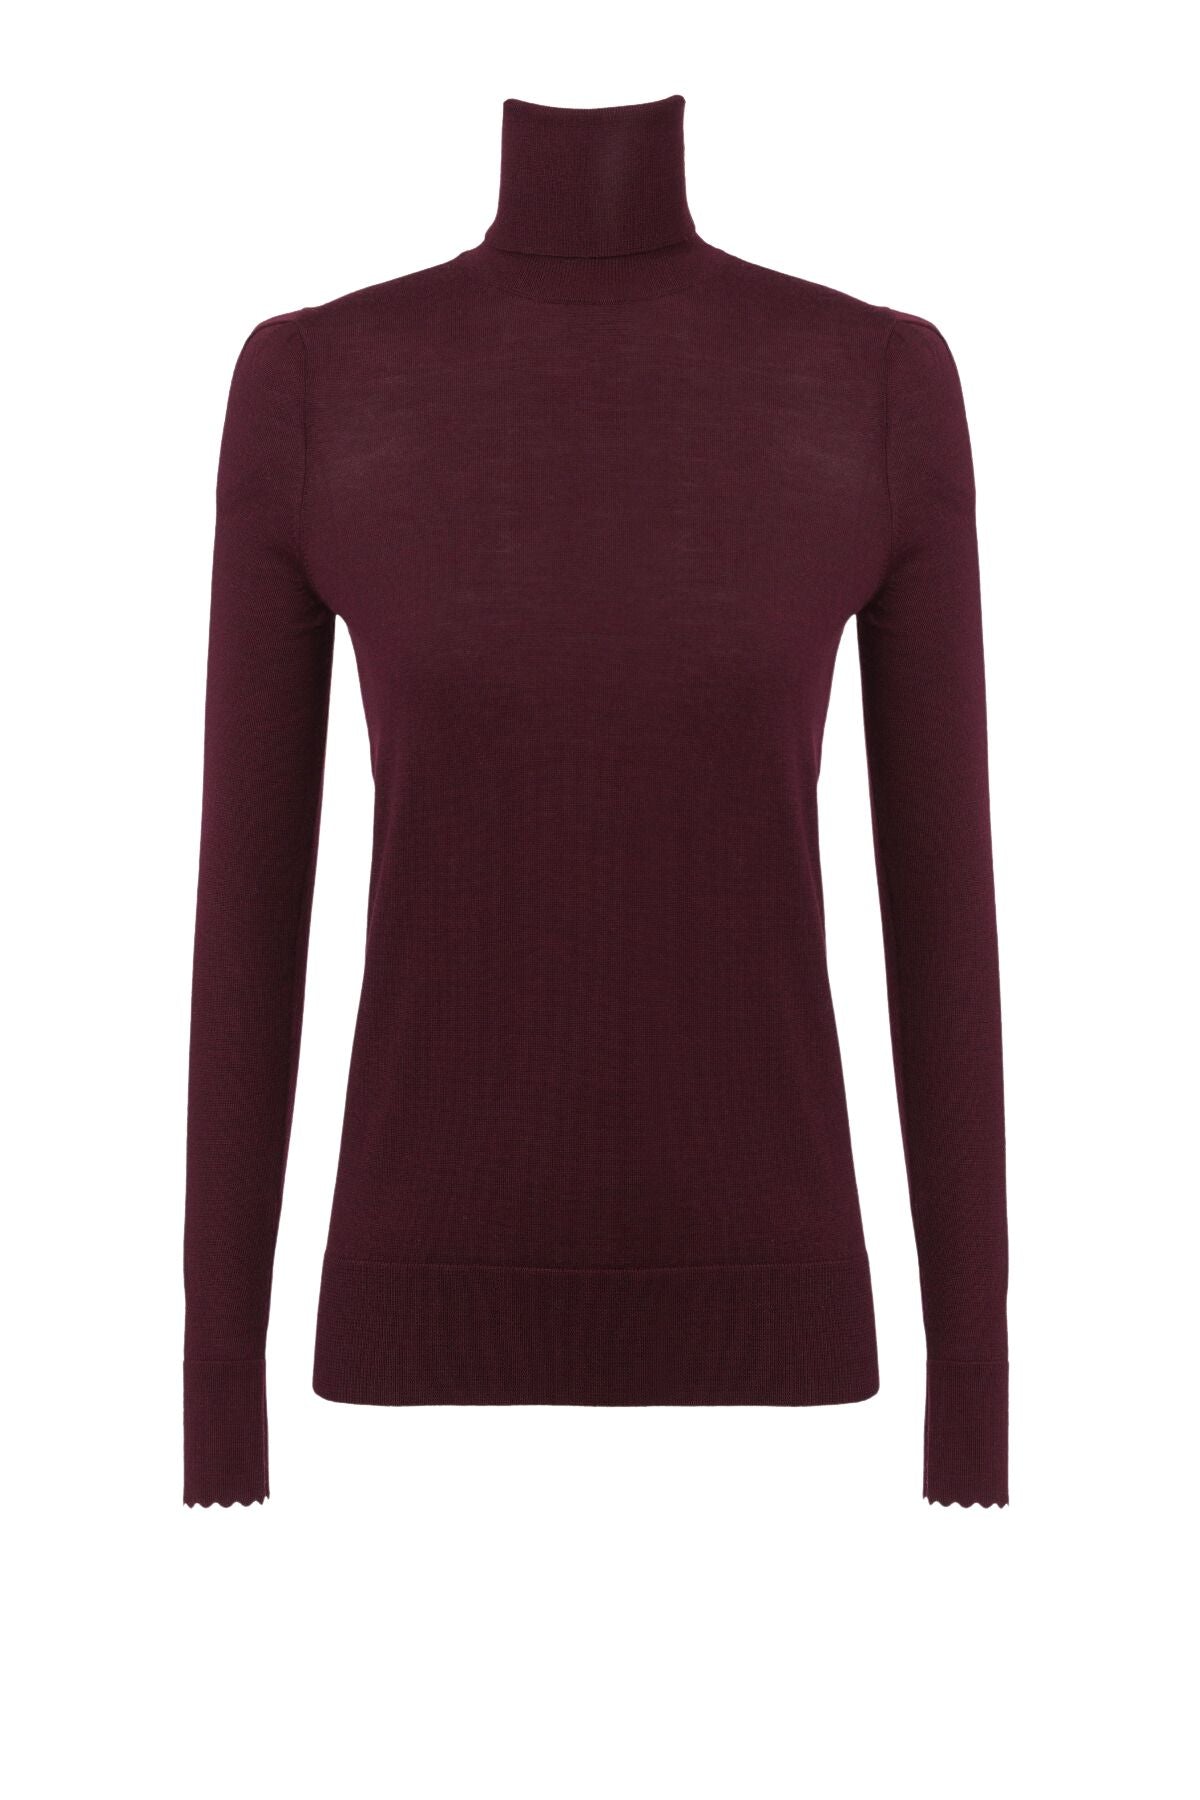 Chloé Fitted Turtleneck Sweater - Obscure Purple